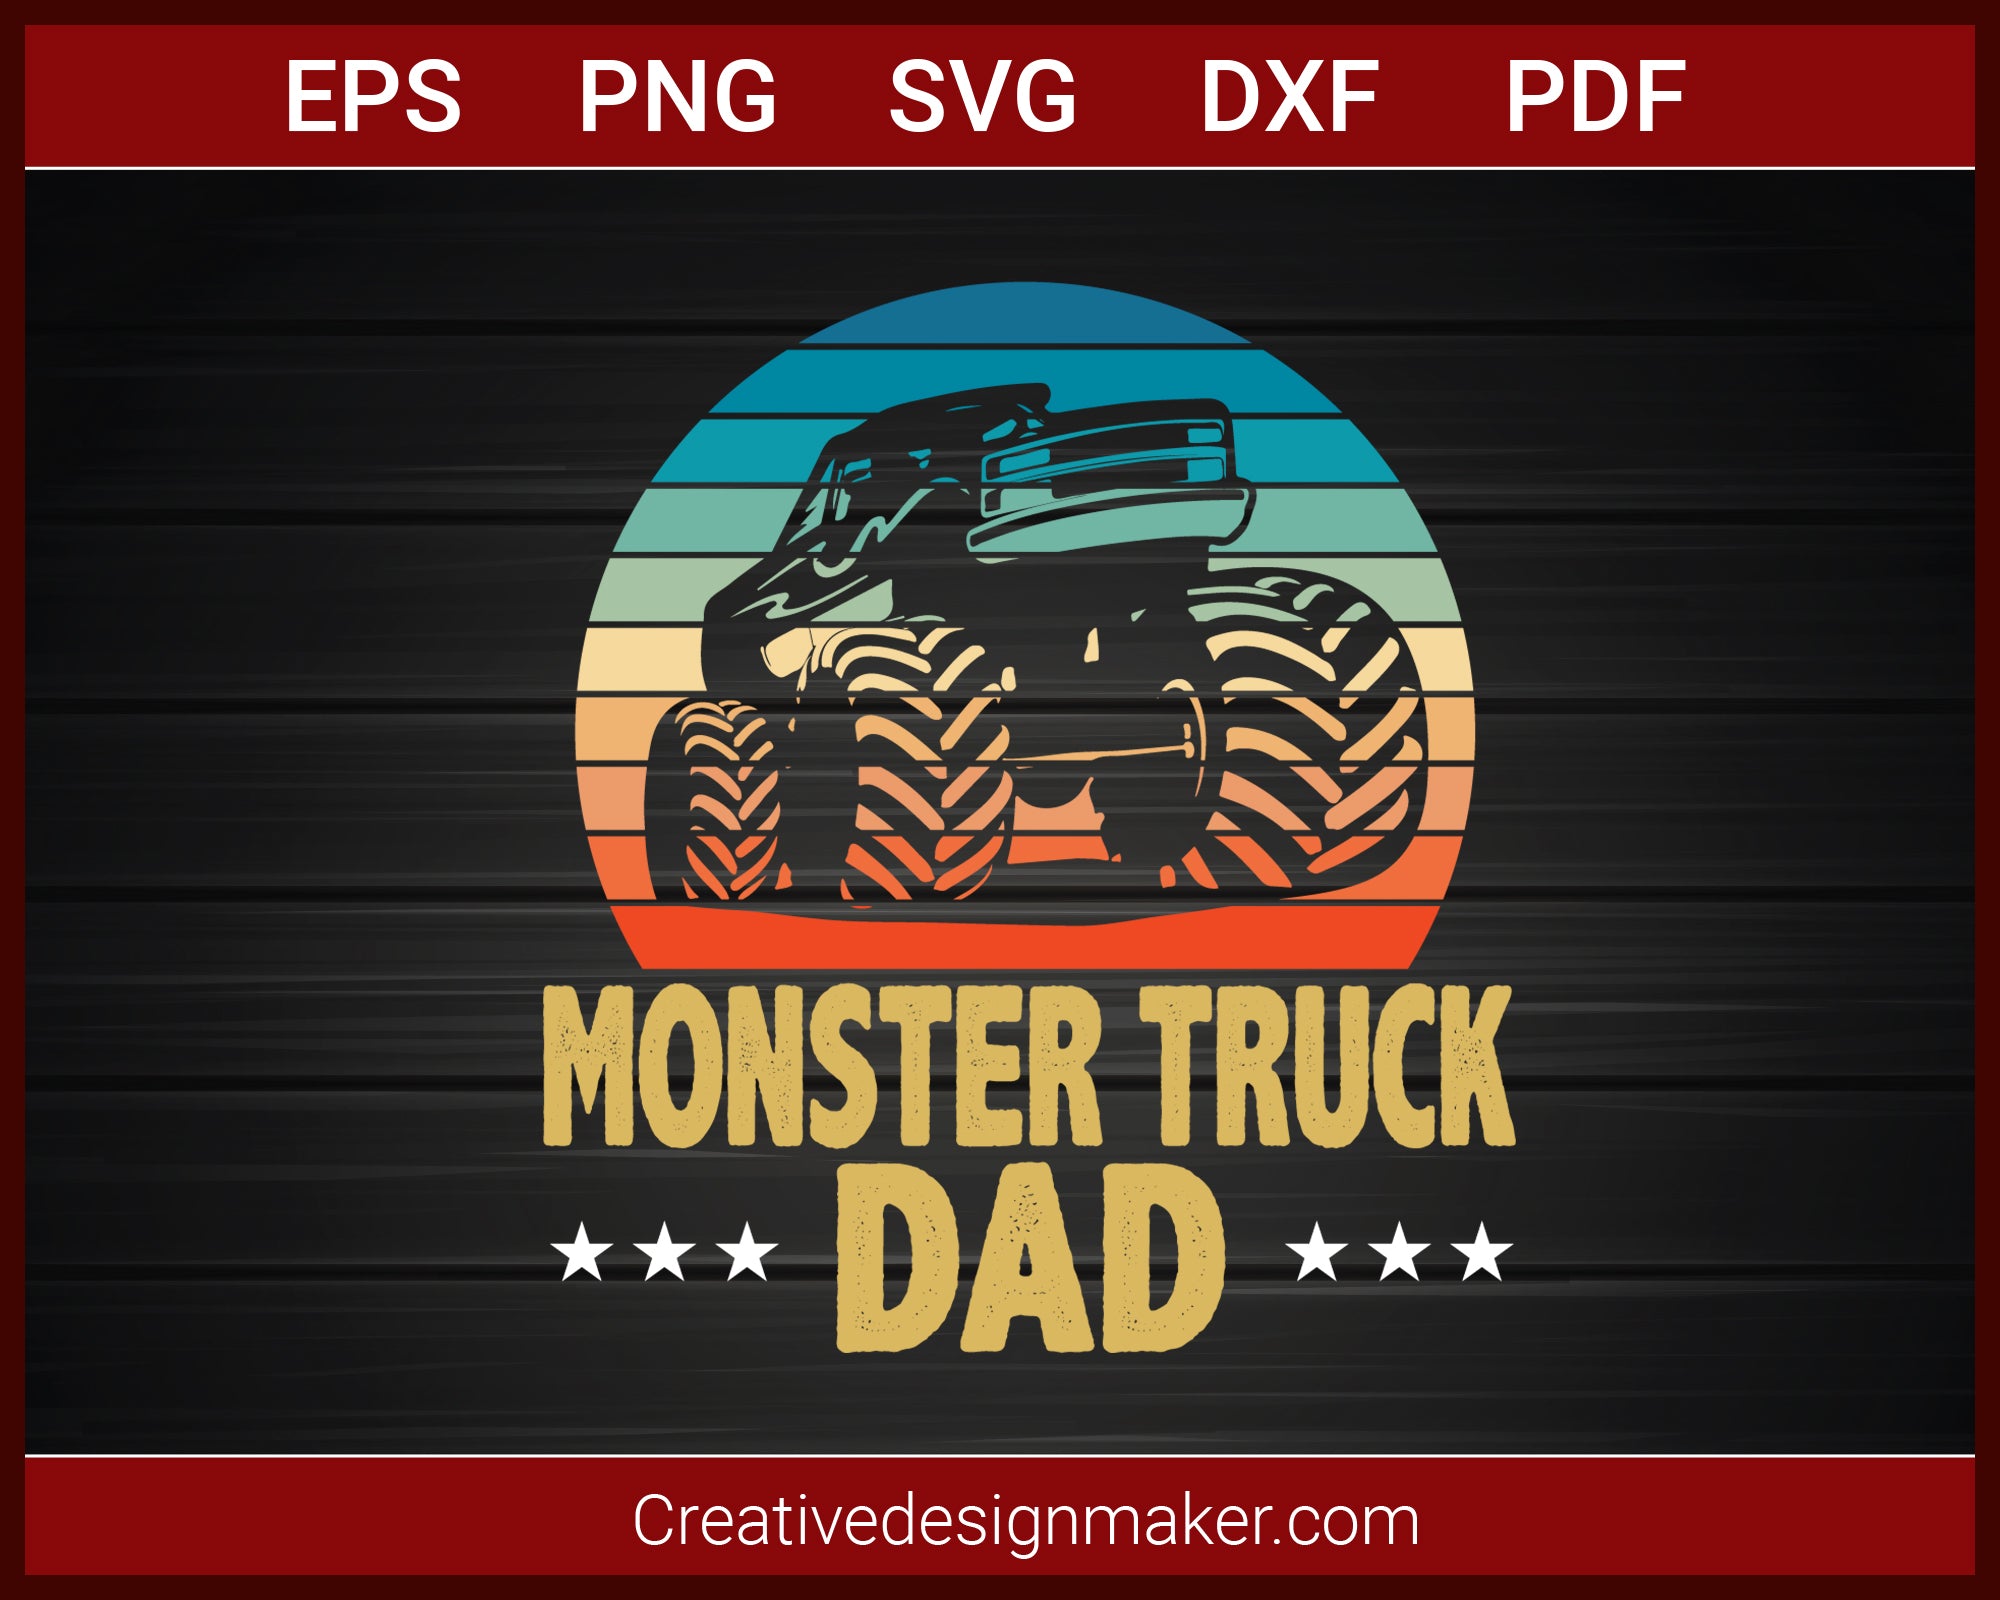 Monster Truck Dad Bigfoot Vintage Monster Truck T-shirt SVG PNG DXF EPS PDF Cricut Cameo File Silhouette Art, Designs For Shirts